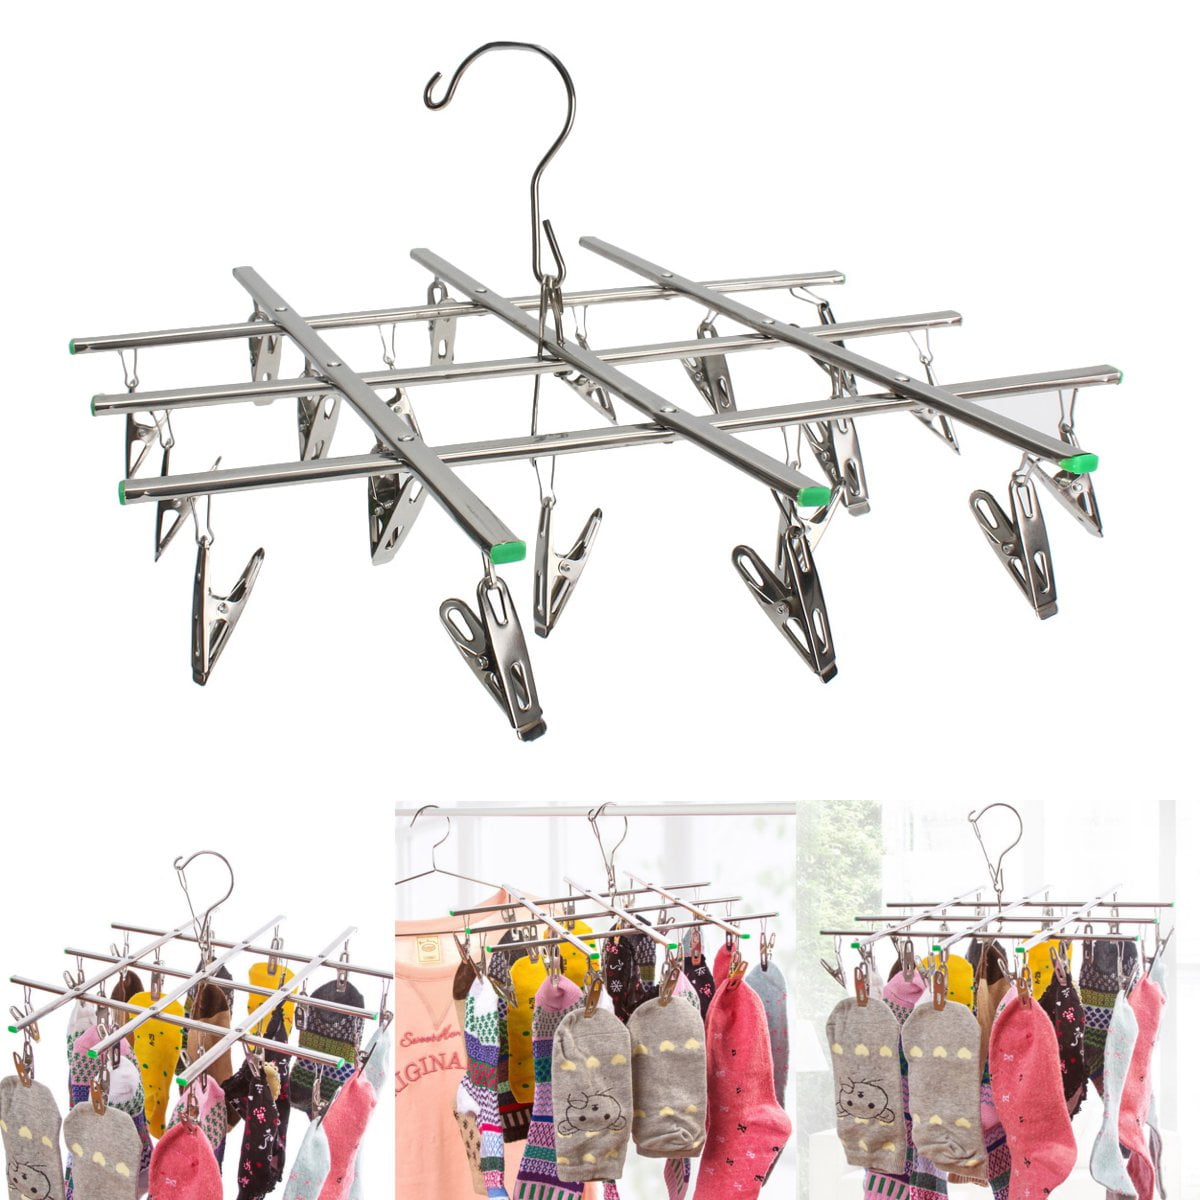 6 Or 20 Clips Clothes Drying Rack Metal Clothespins Hanger Clip Set Herb Hanging 